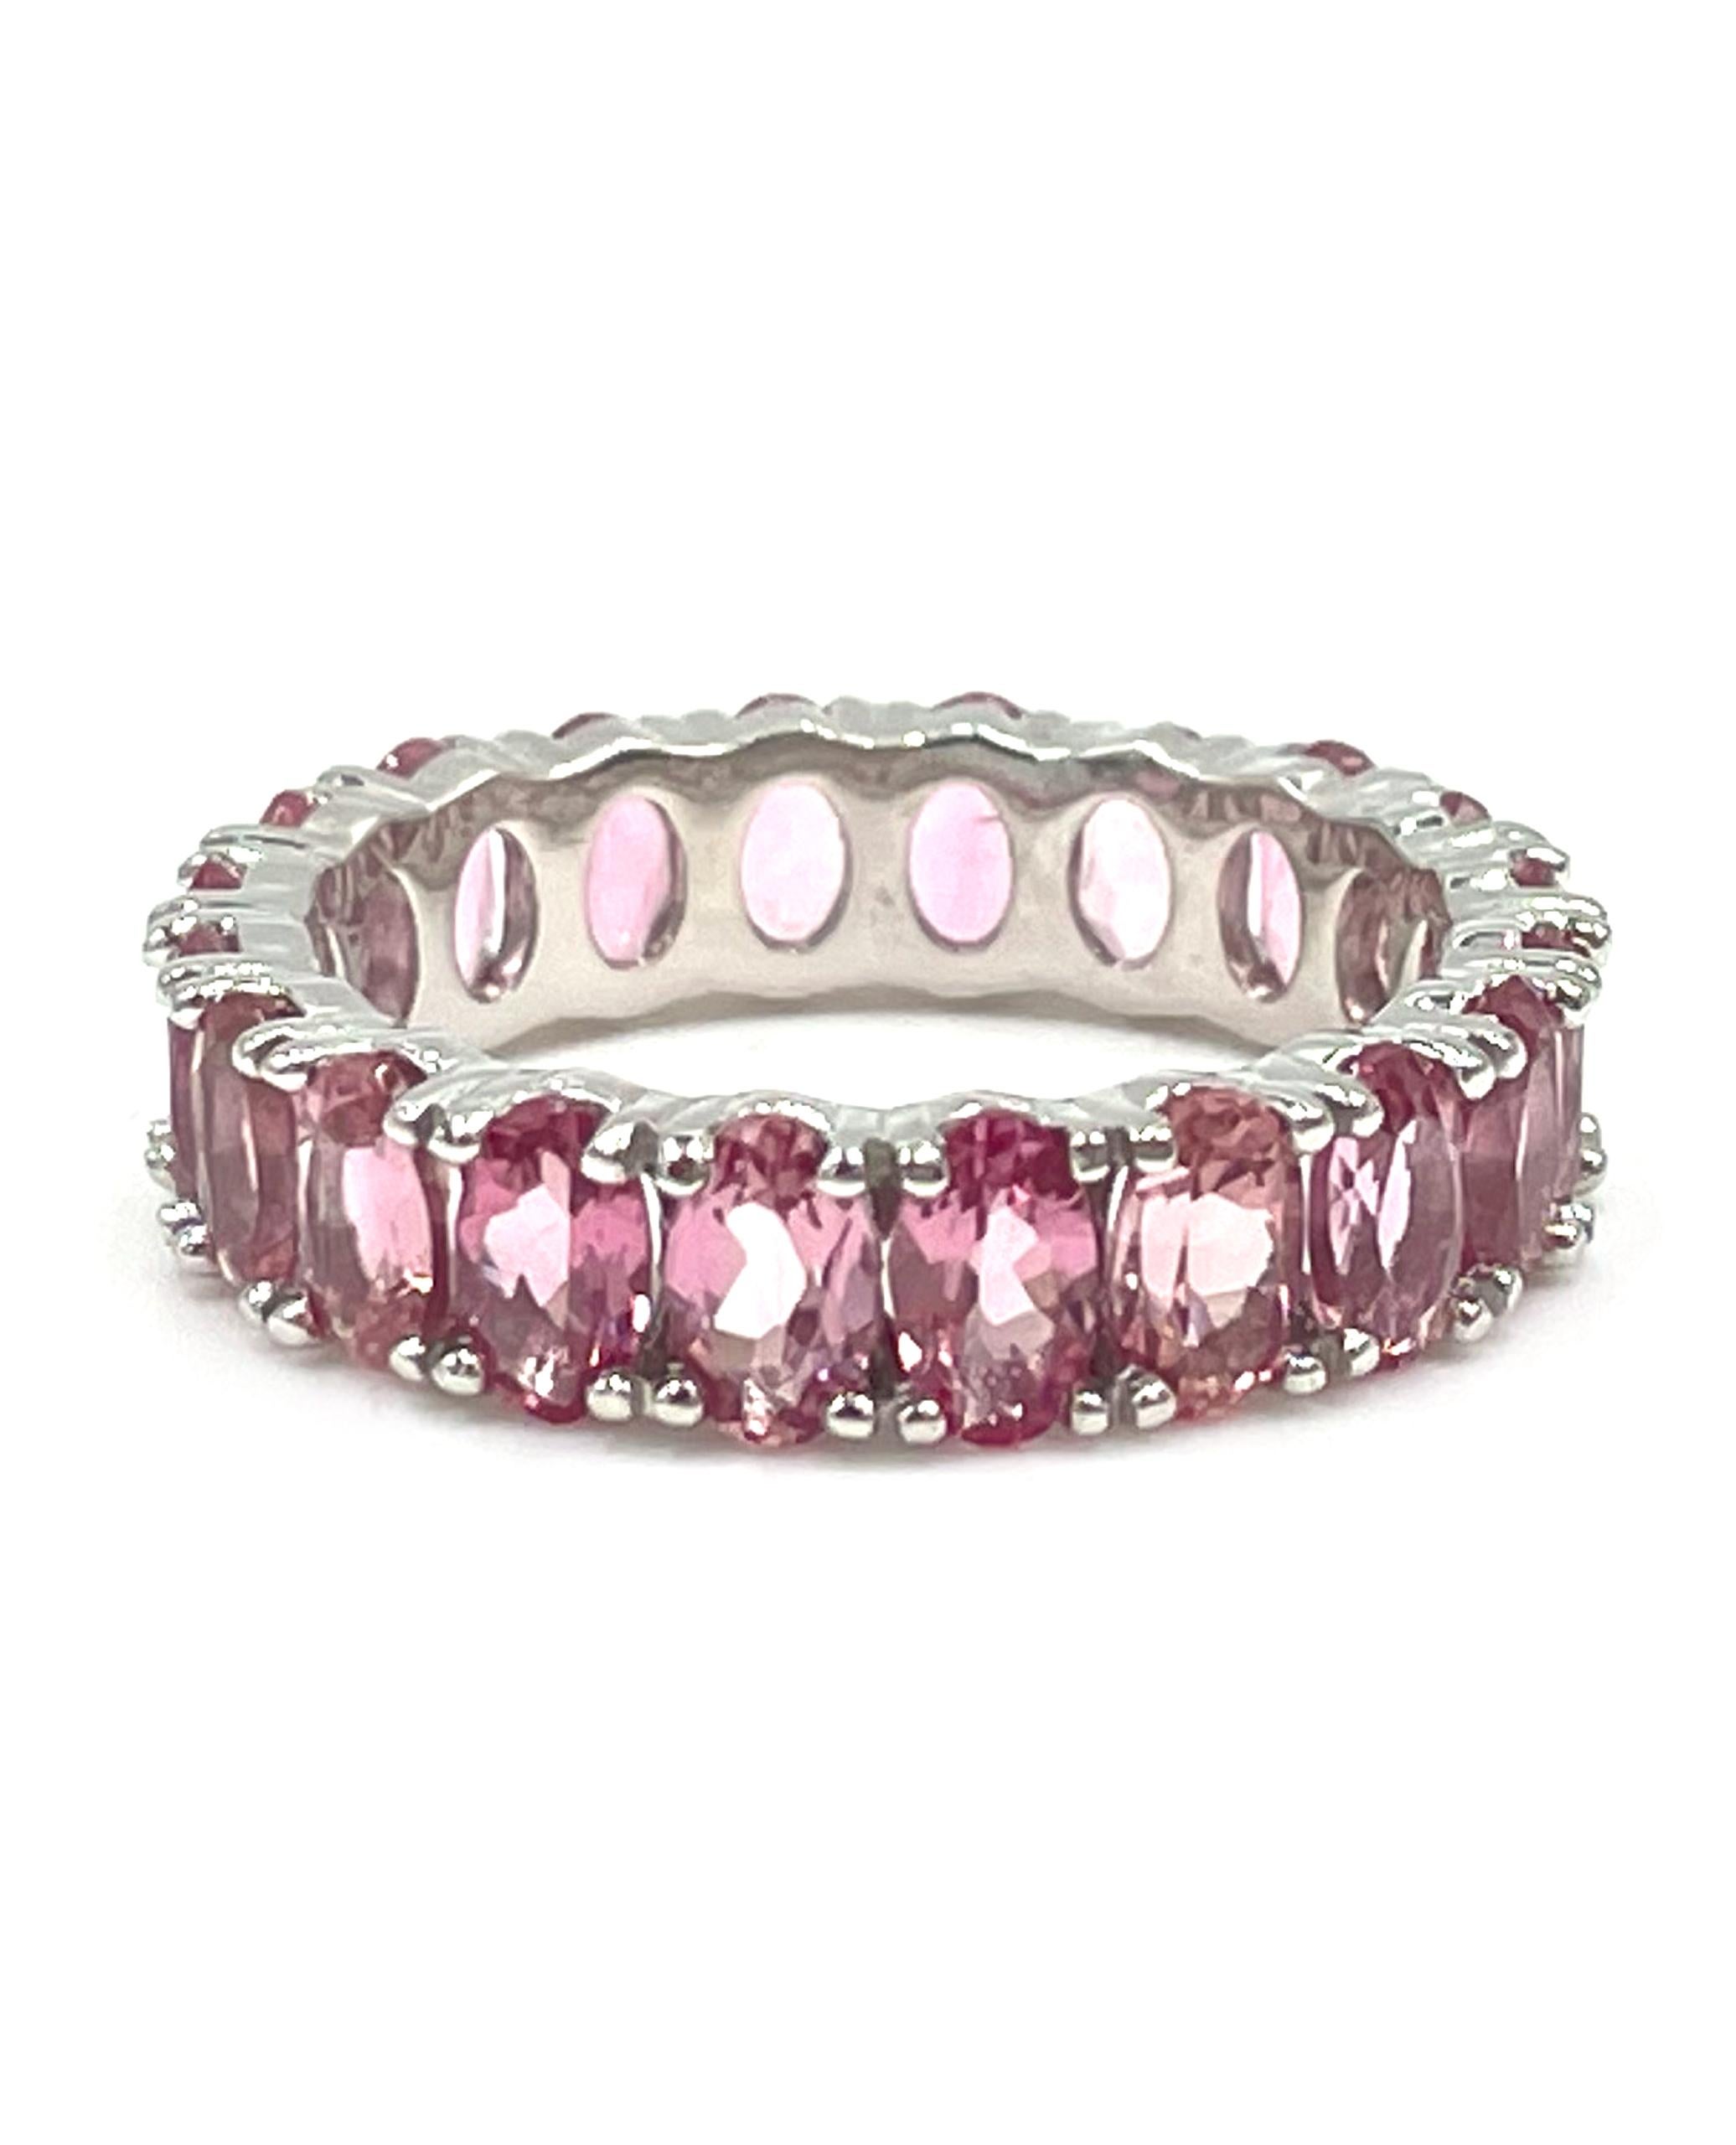 Contemporary 14K White Gold Oval Shape Pink Tourmaline Eternity Ring - 4.21 carats For Sale